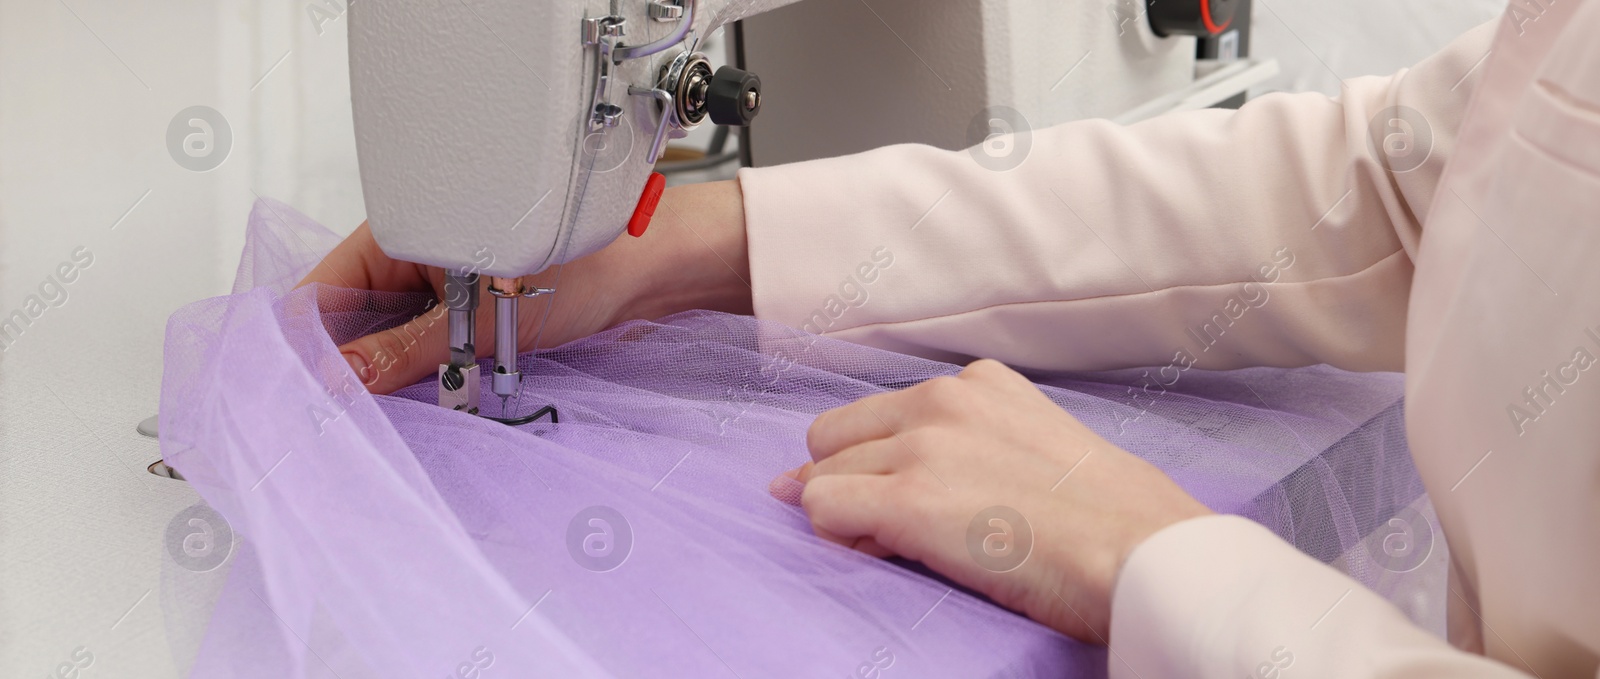 Image of Dressmaker sewing new dress with machine in workshop, closeup. Banner design